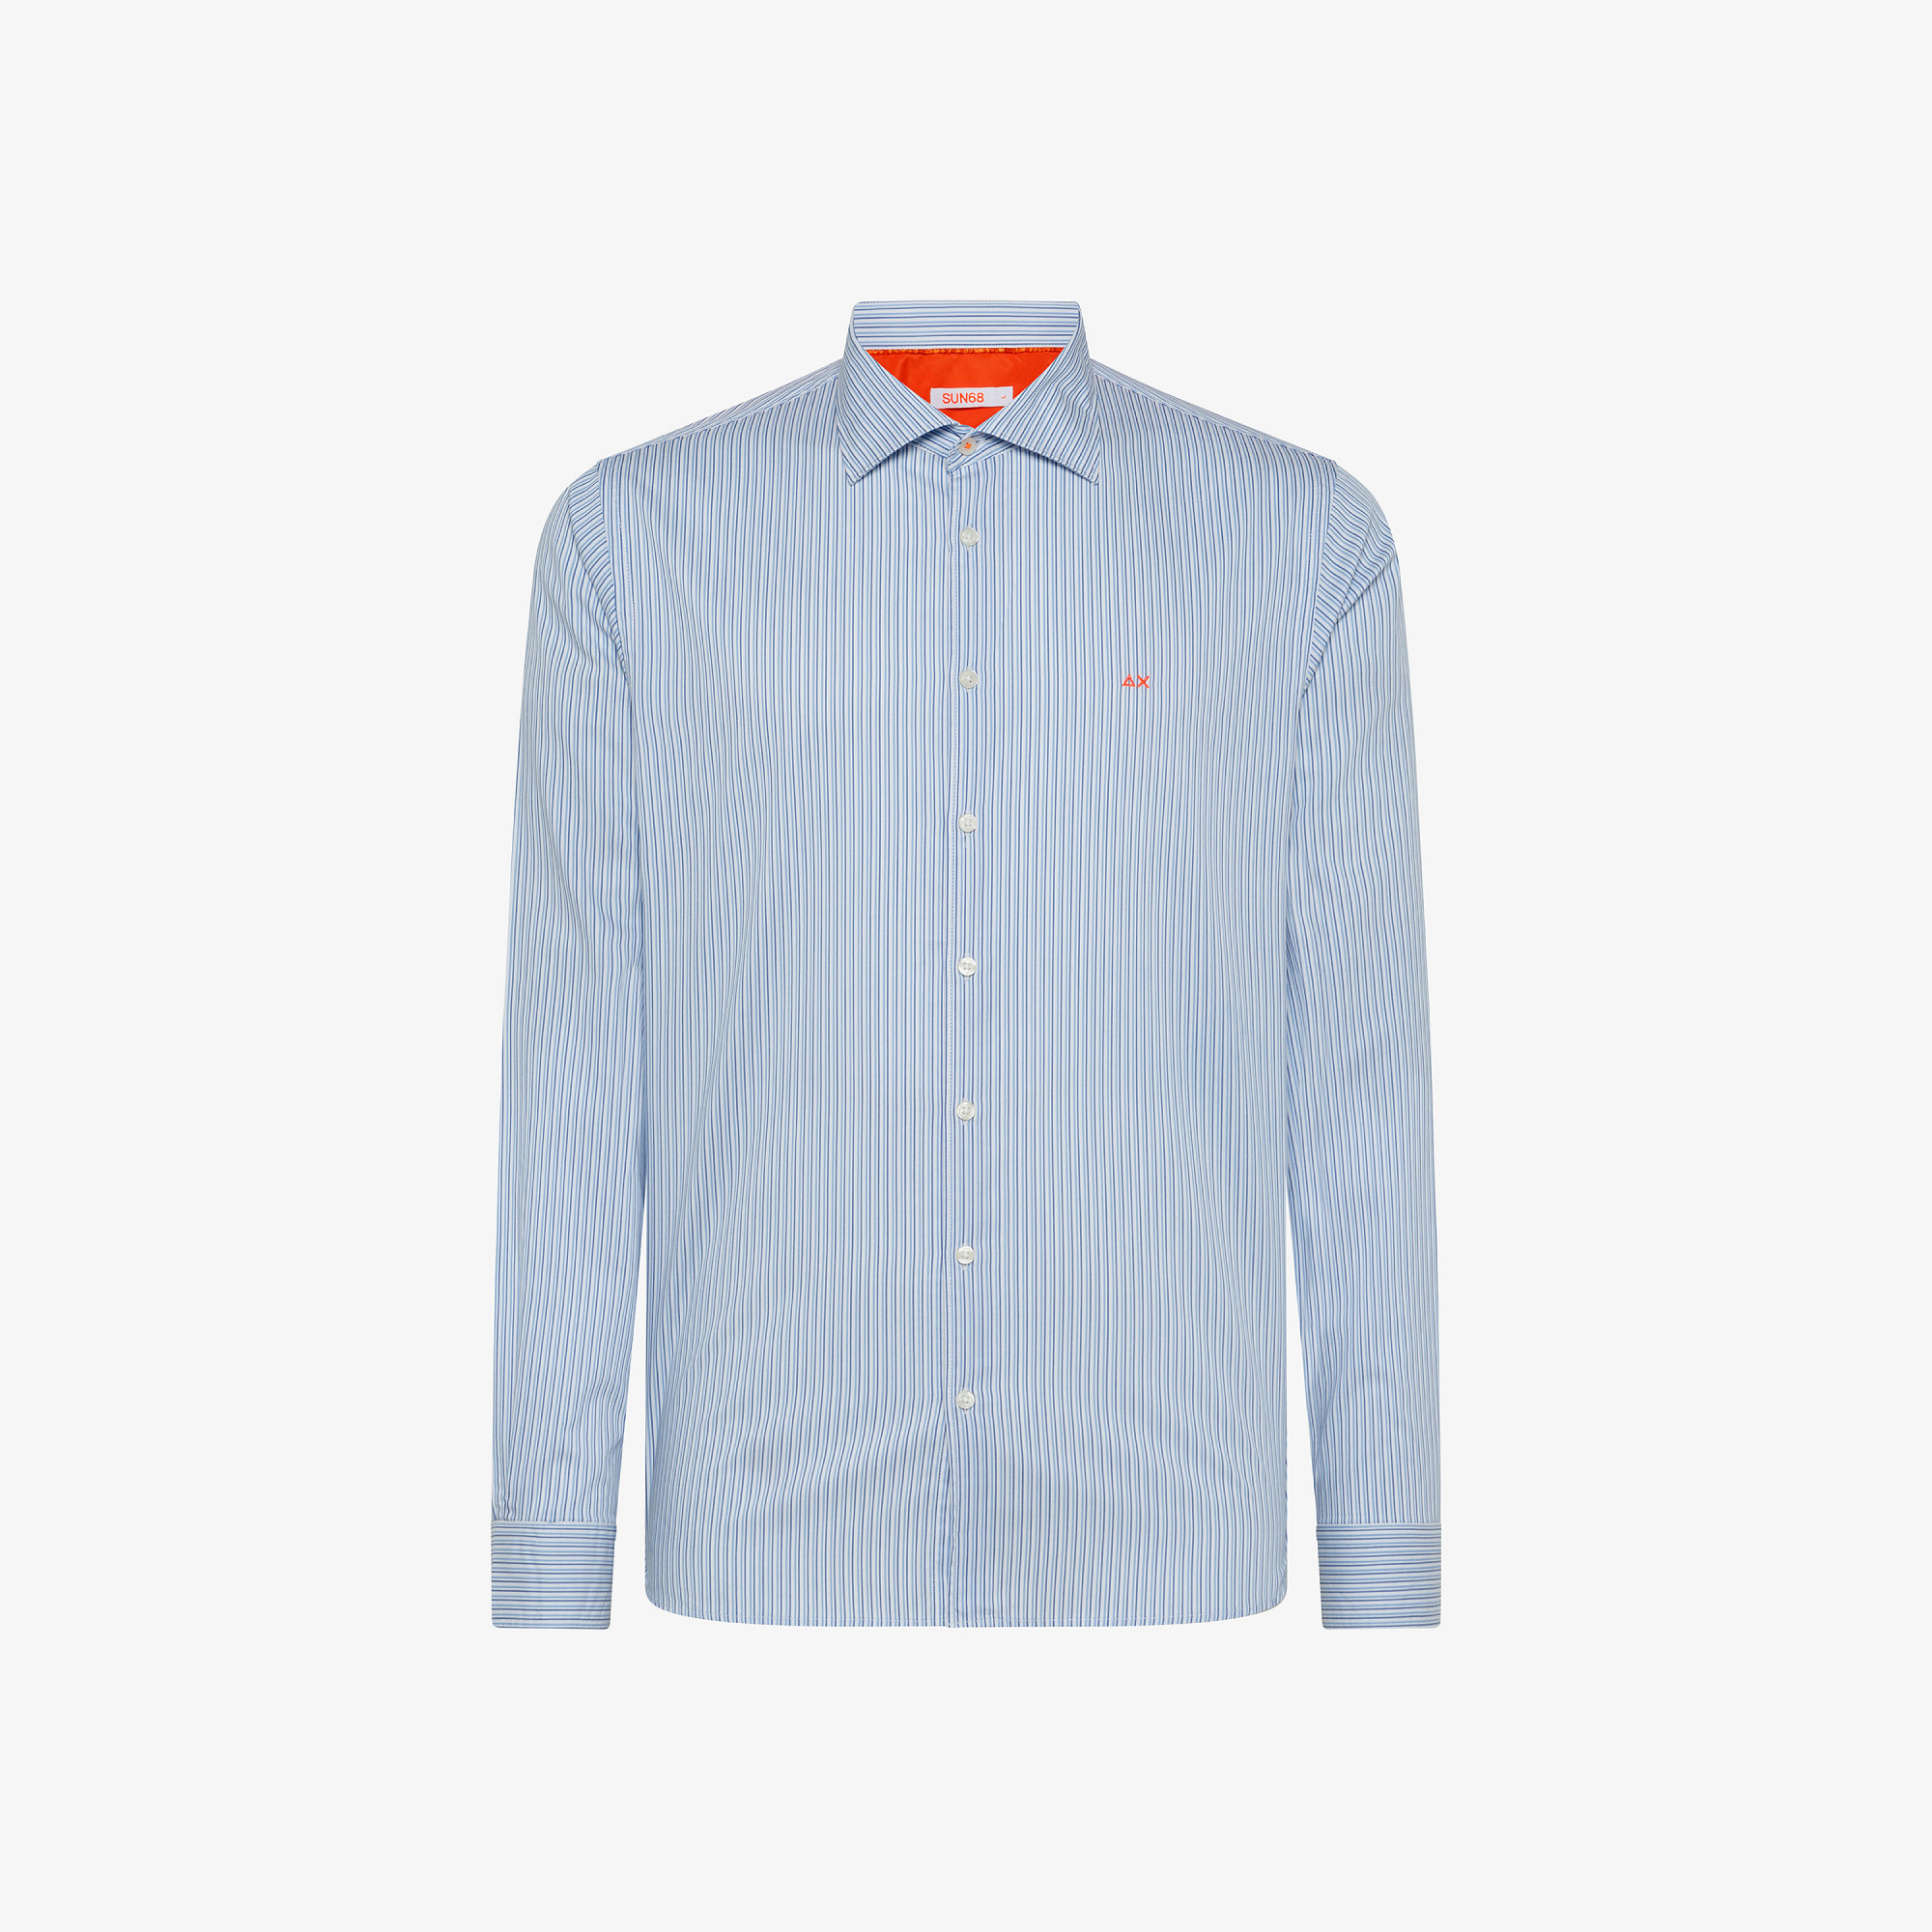 SHIRT CLASSIC STRIPES WITH FLUO DETAIL WHITE/LIGHT BLUE